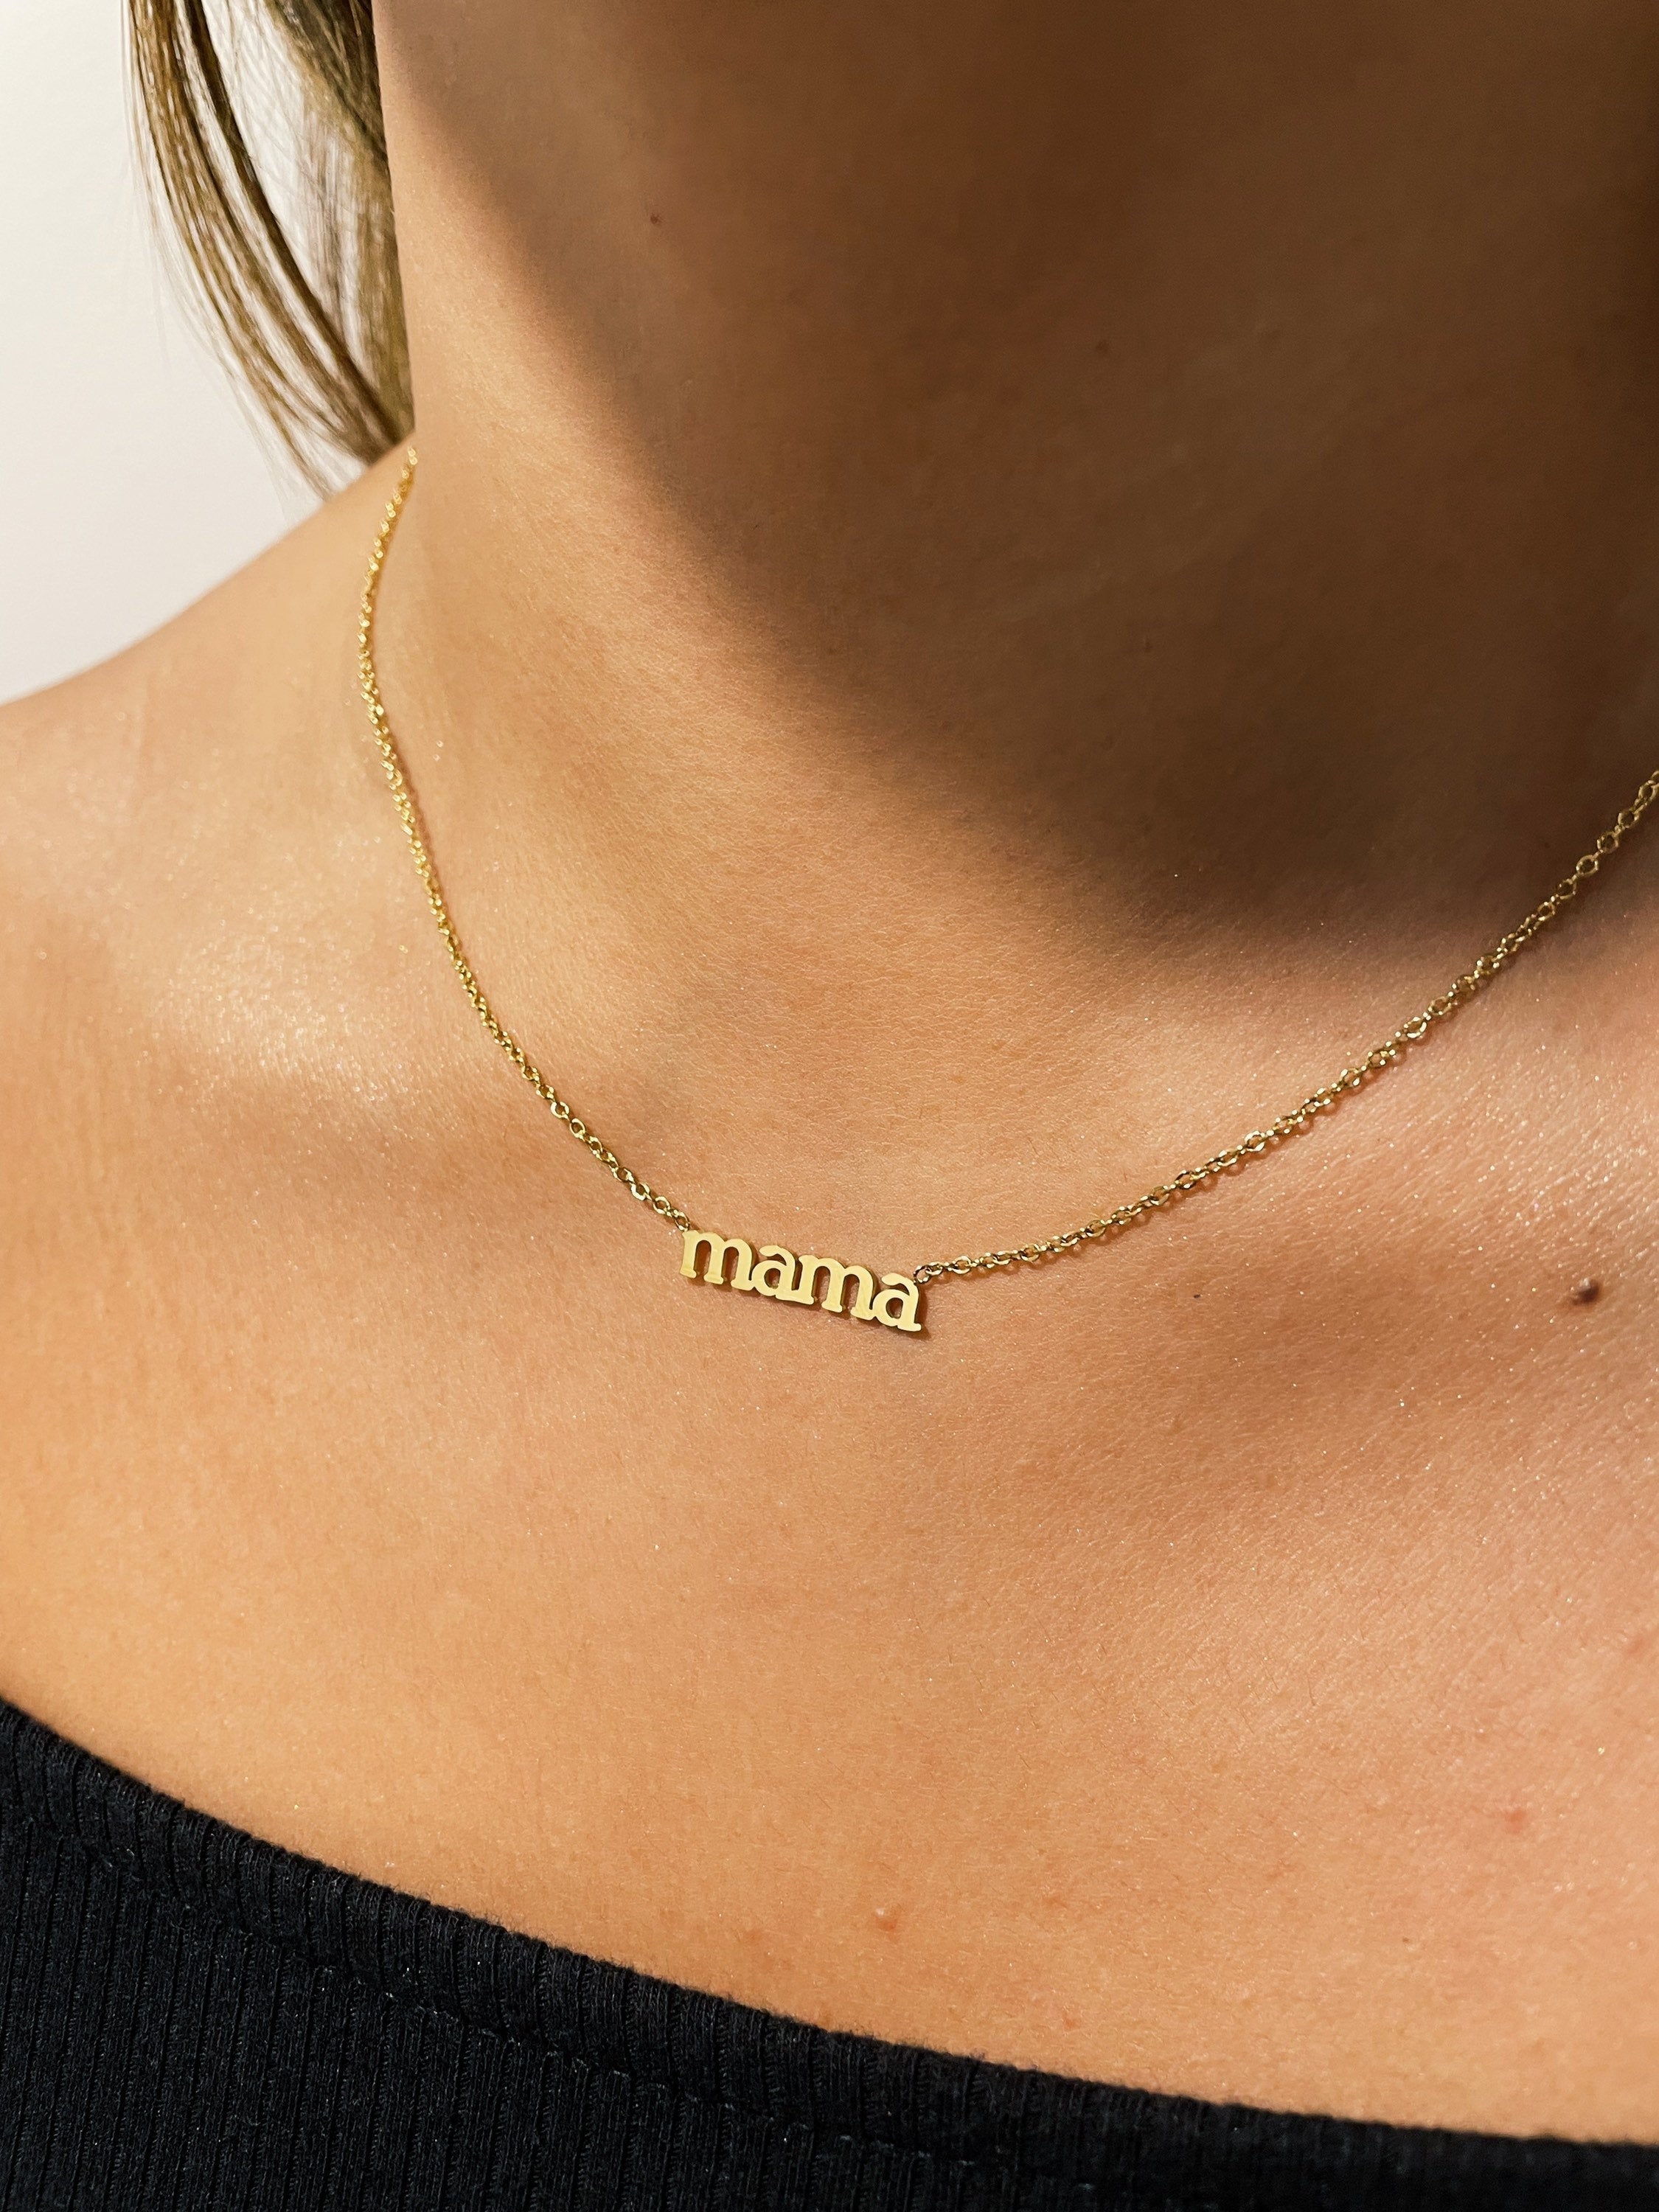 mama necklace 18k gold plated | EnvyHer- Personalized Jewelry